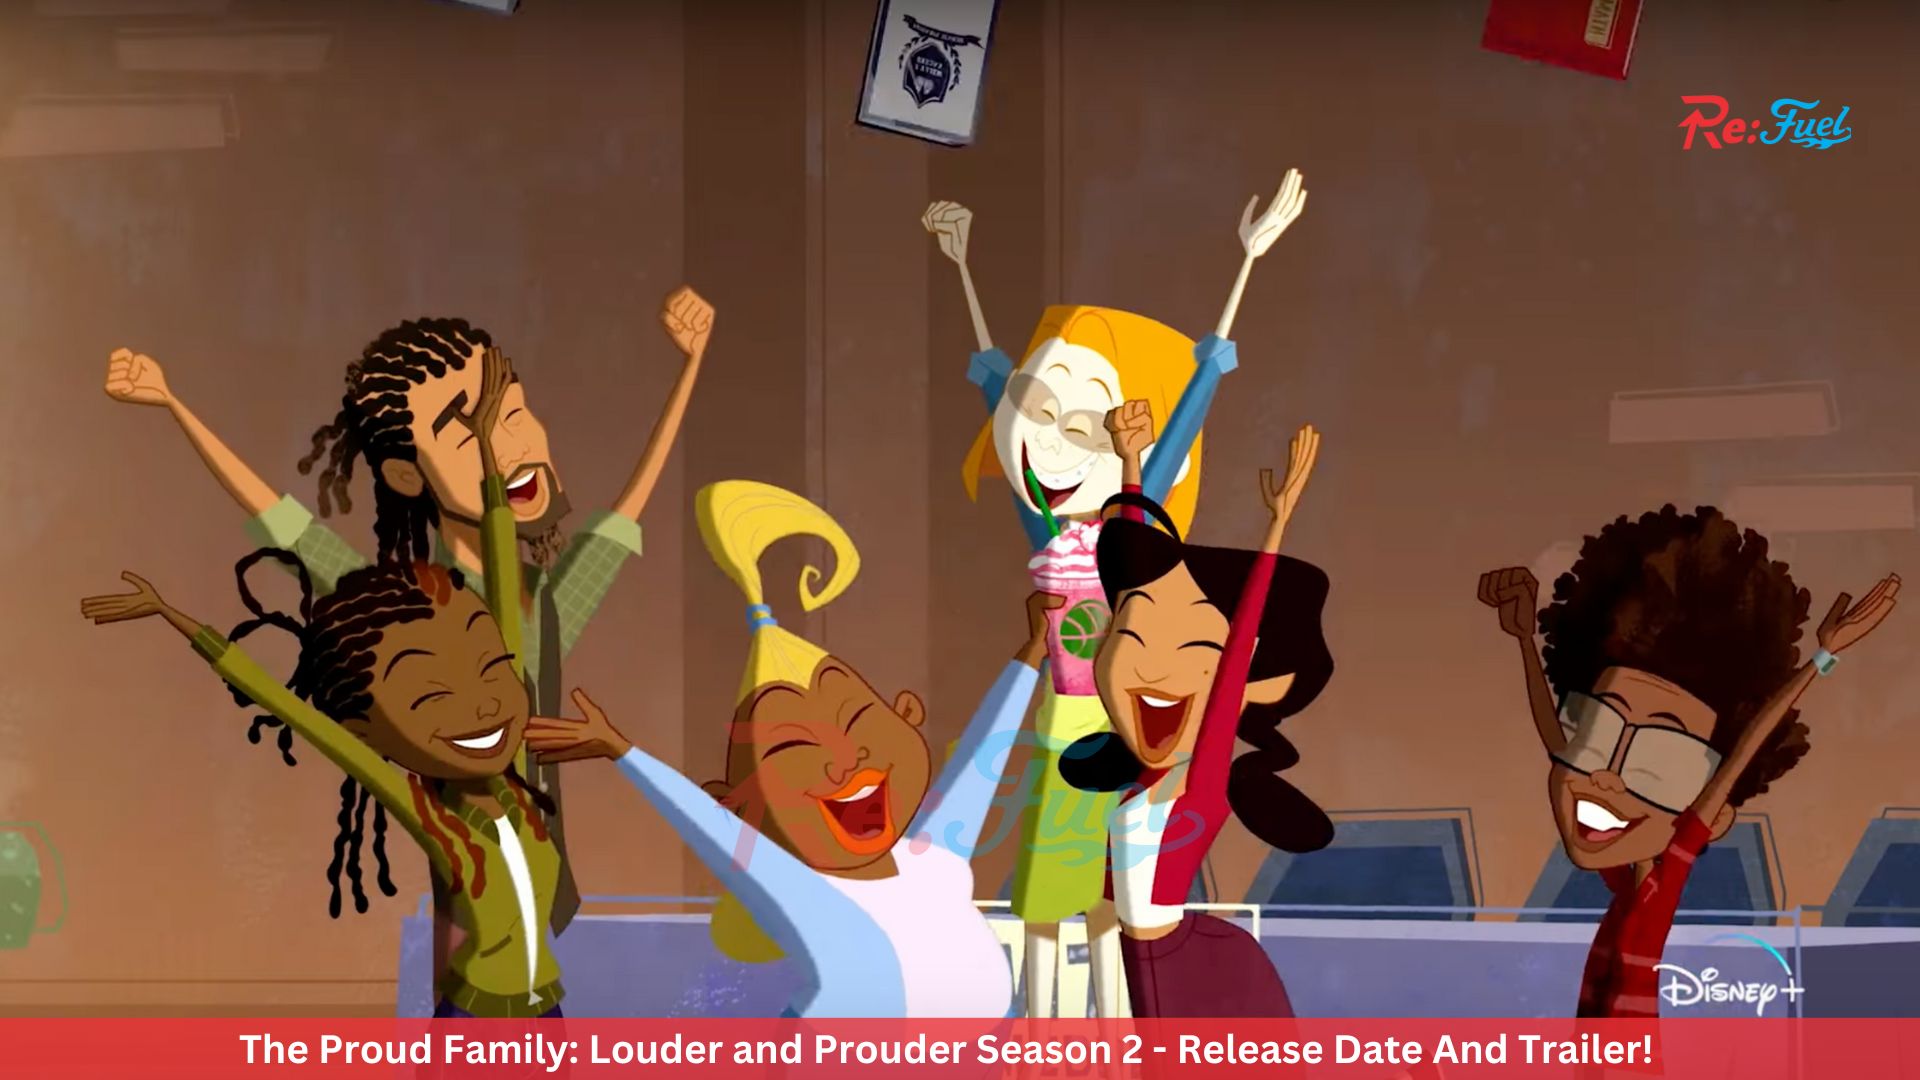 The Proud Family: Louder and Prouder Season 2 - Release Date And Trailer!